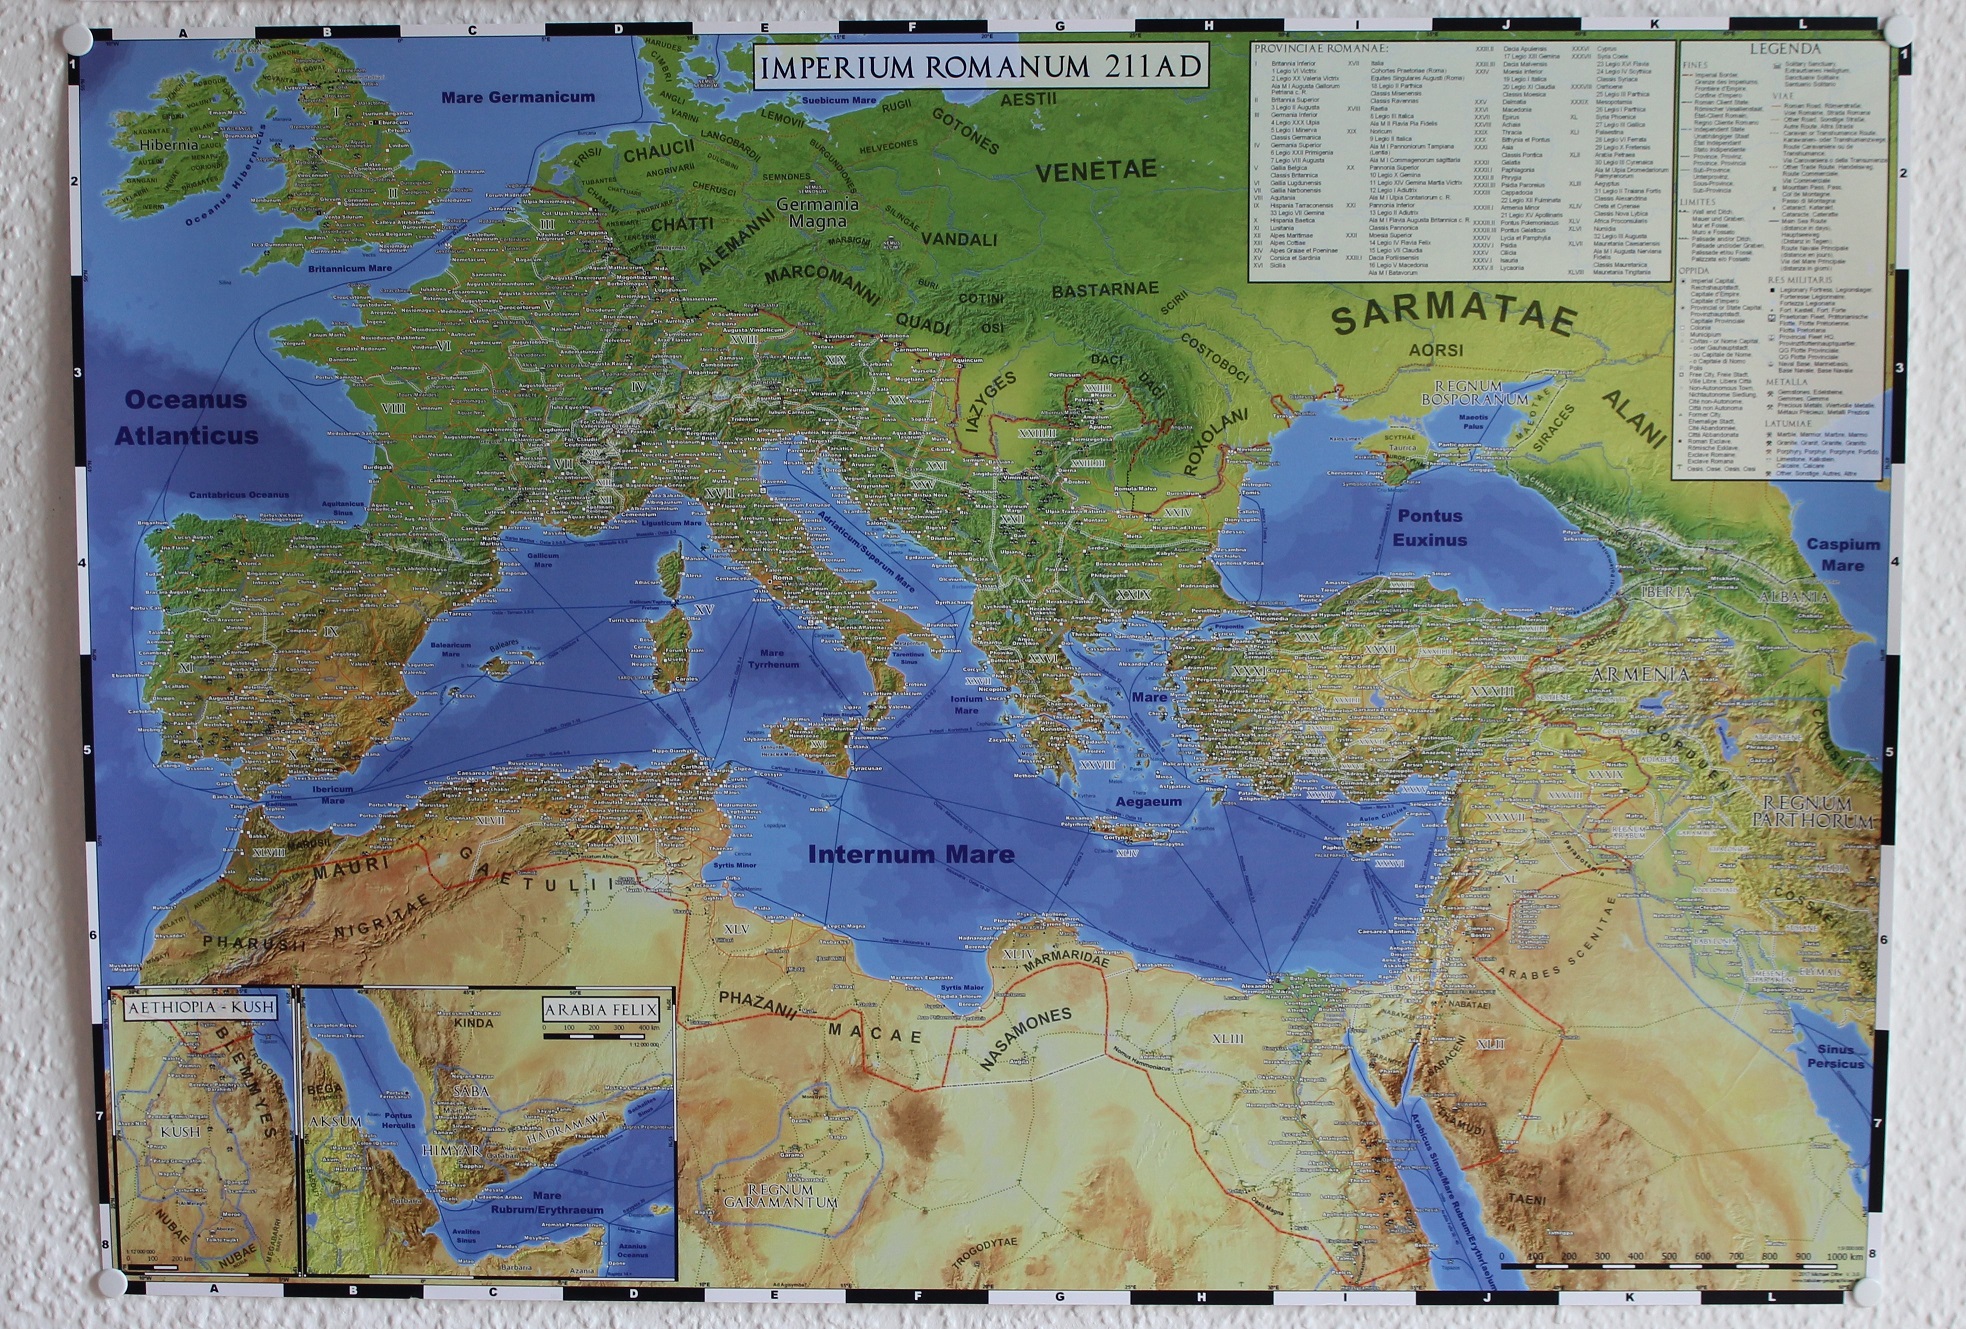 "Imperium Romanum 211 AD" scaled down to DIN A2